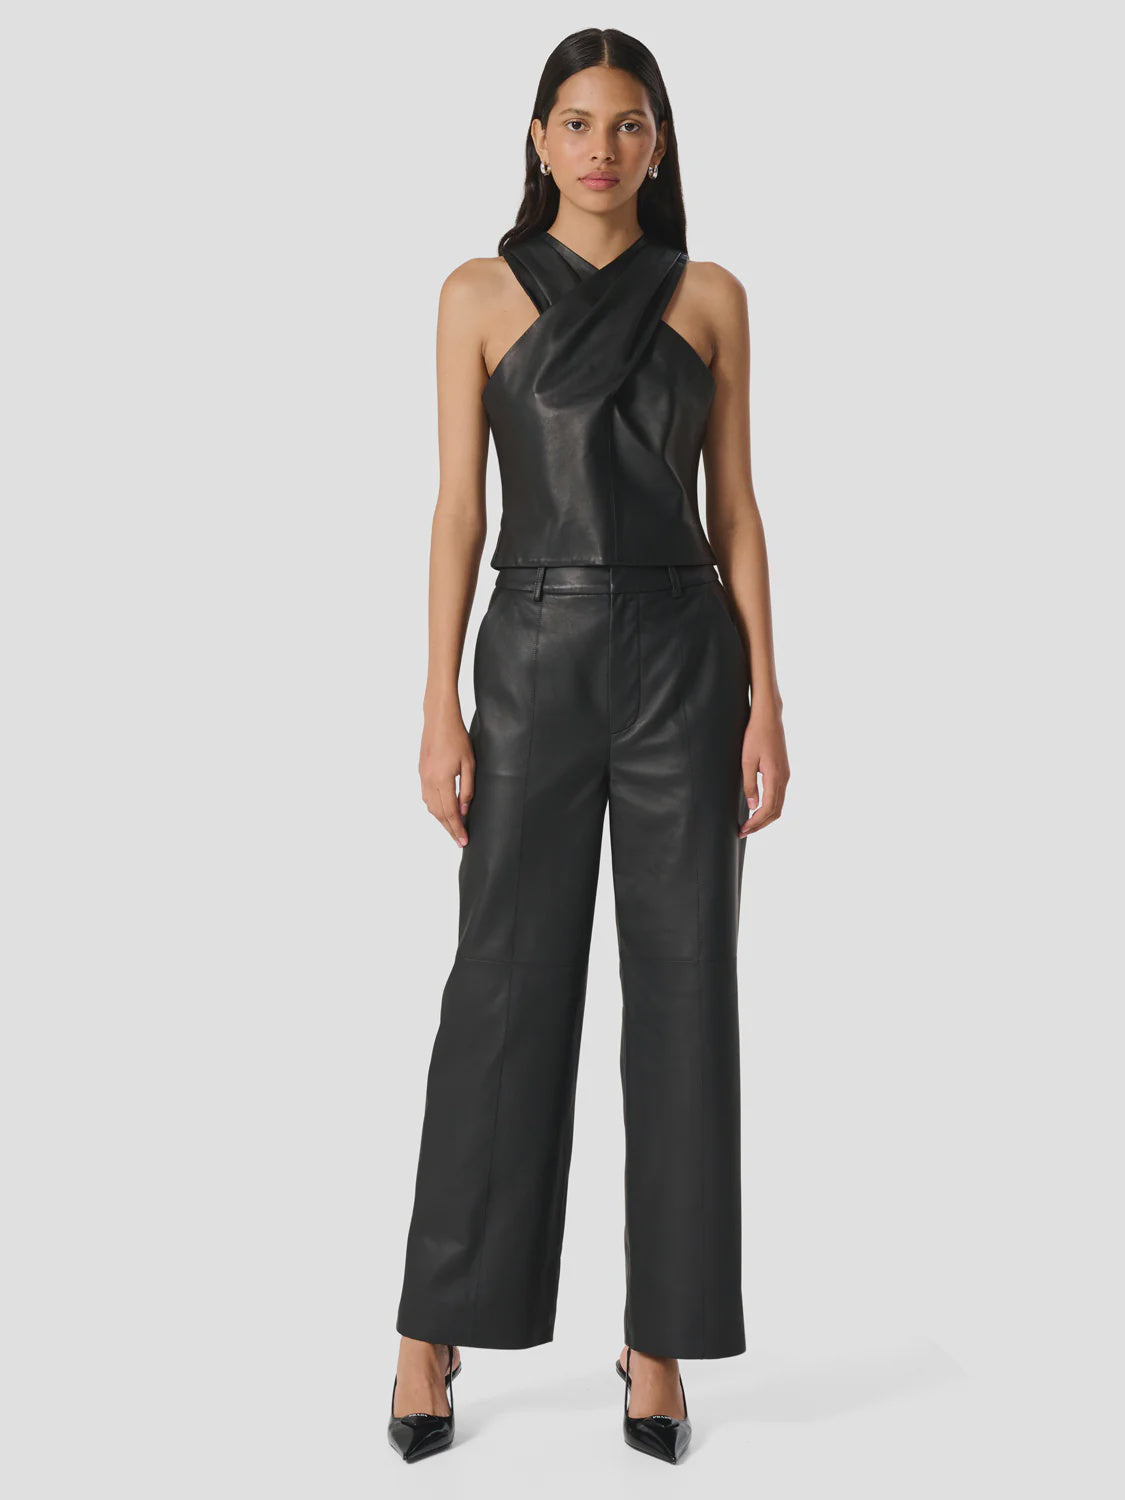 ENA PELLY - STANFORD LEATHER PANT - BLACK